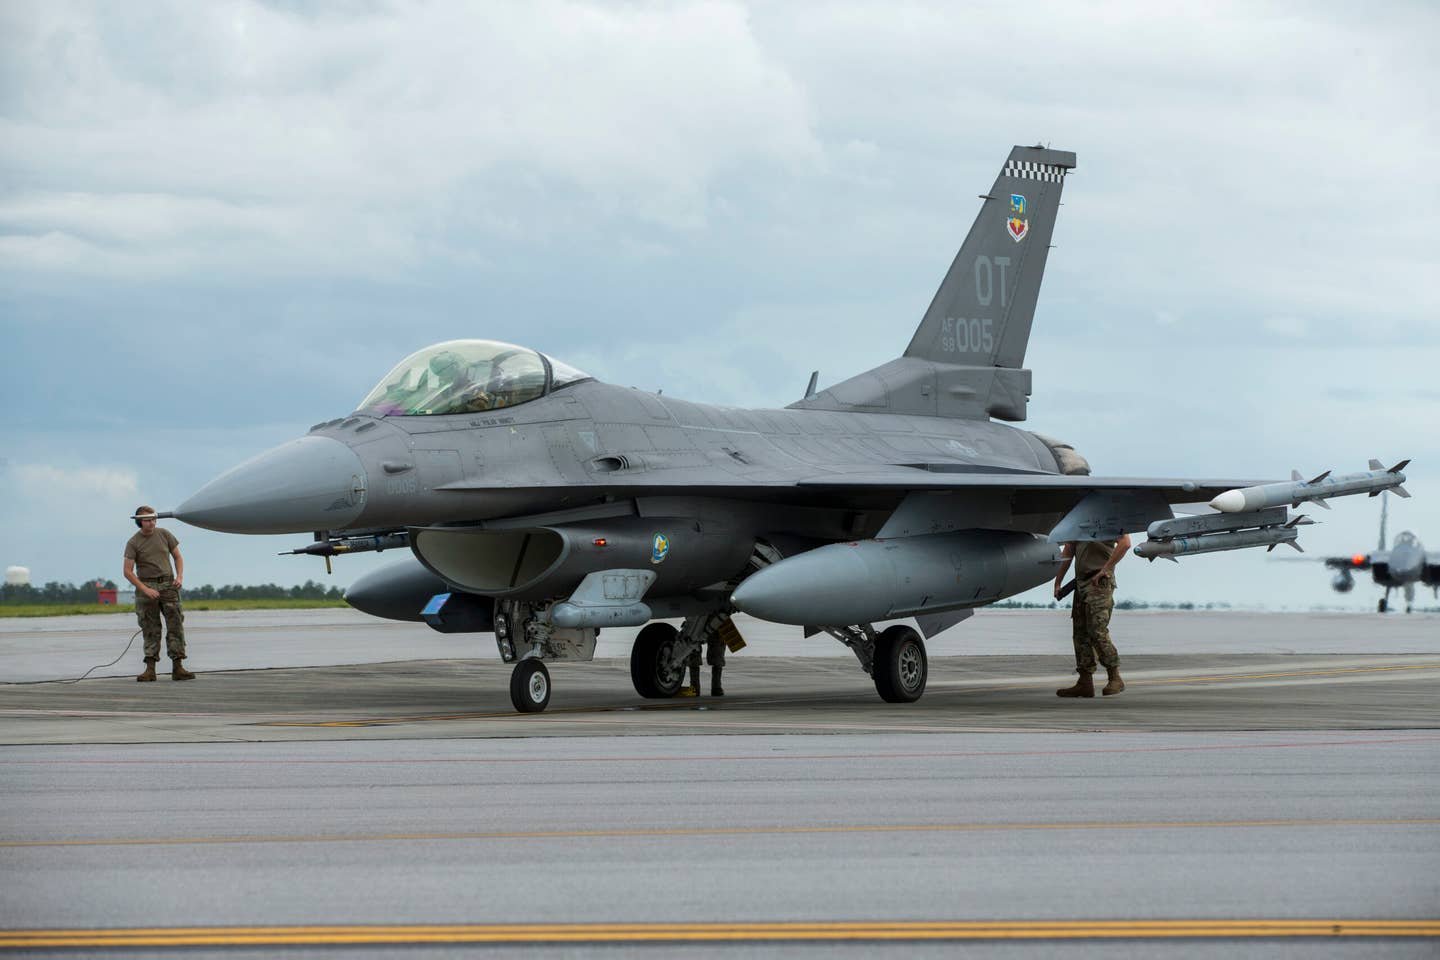 Maintainers from the 96th Test Wing prepare an F-16 Fighting Falcon for a flight test with its new APG-83 Active Electronically Scanned Array radar at Eglin Air Force Base. <em>Credit: U.S. Air Force photo by Master Sgt. Tristan McIntire</em>